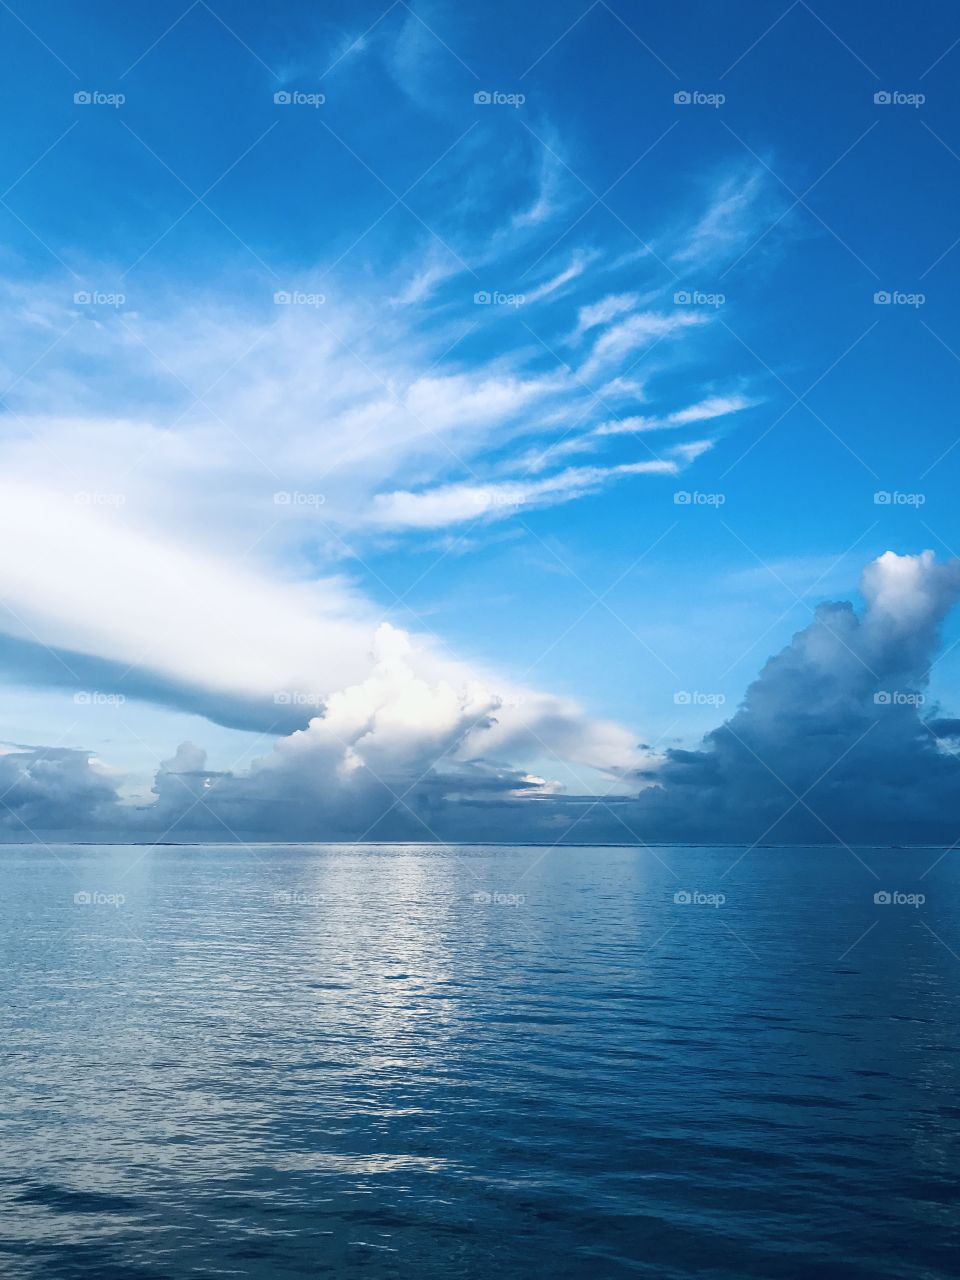 Ocean and Clouds